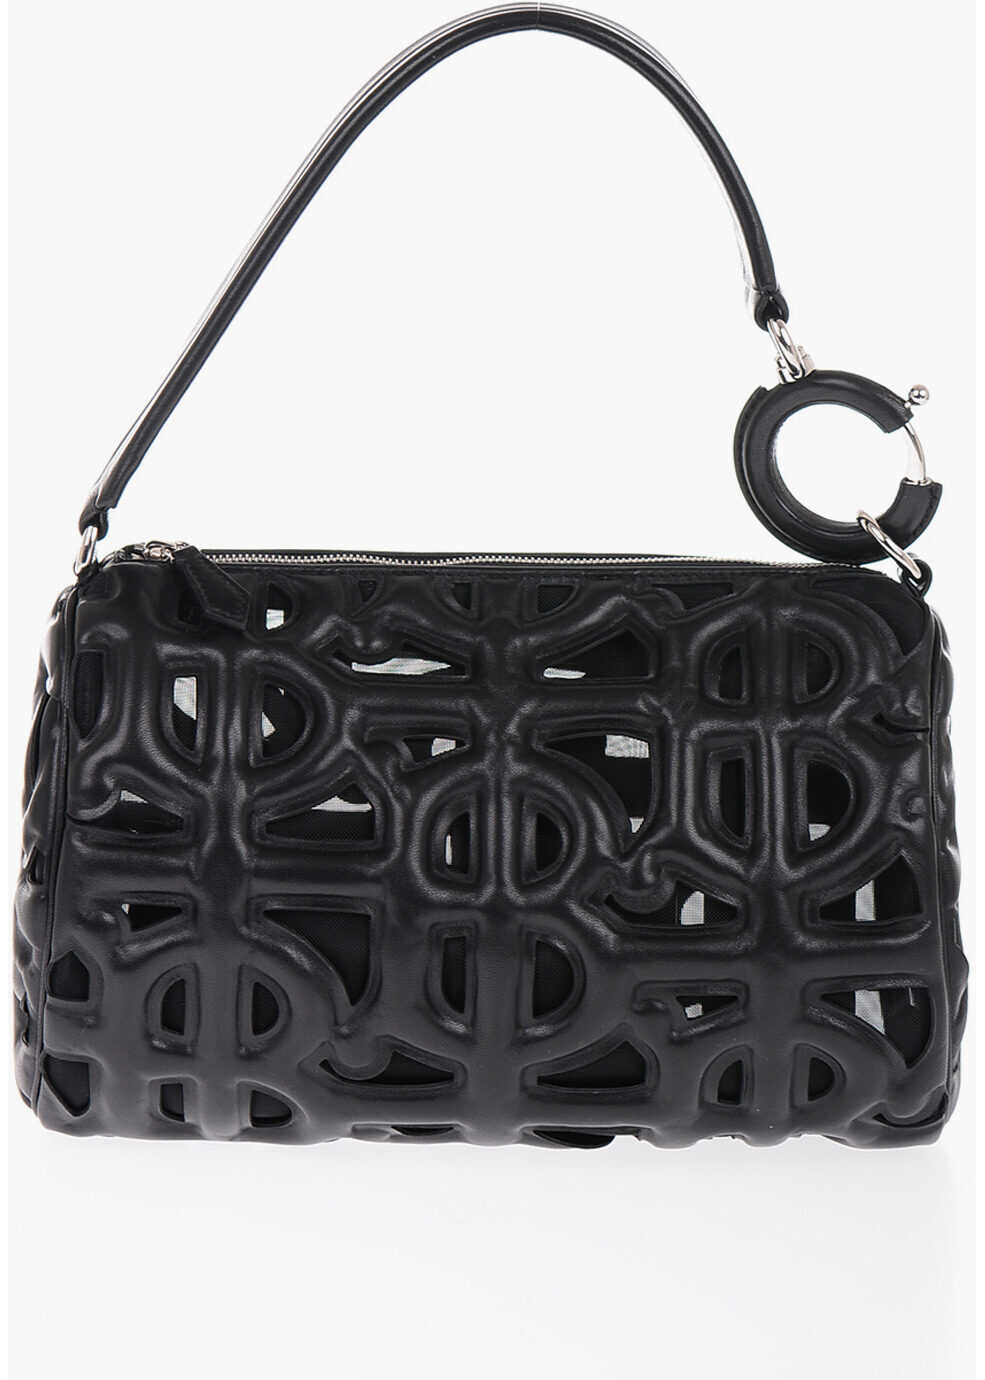 Burberry Leather Rhombi Shoulder Bag With Cut-Out Details And Matched Black